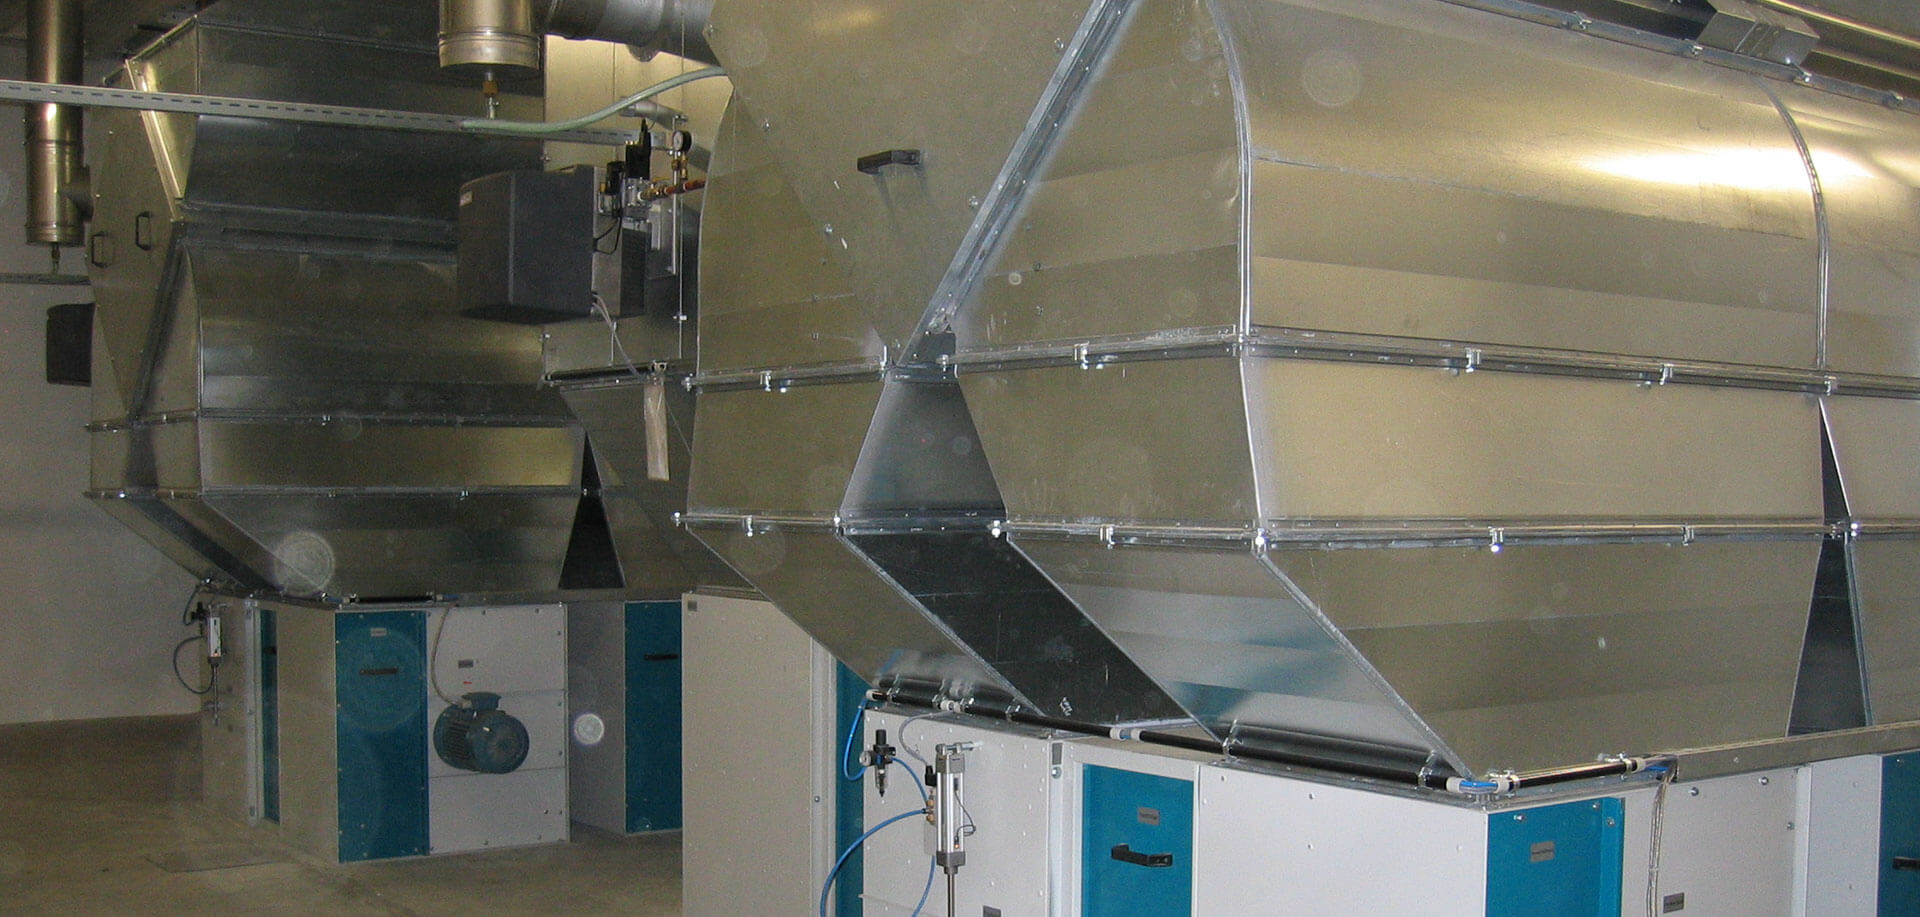 Coating surfaces with ventilation - inTEC